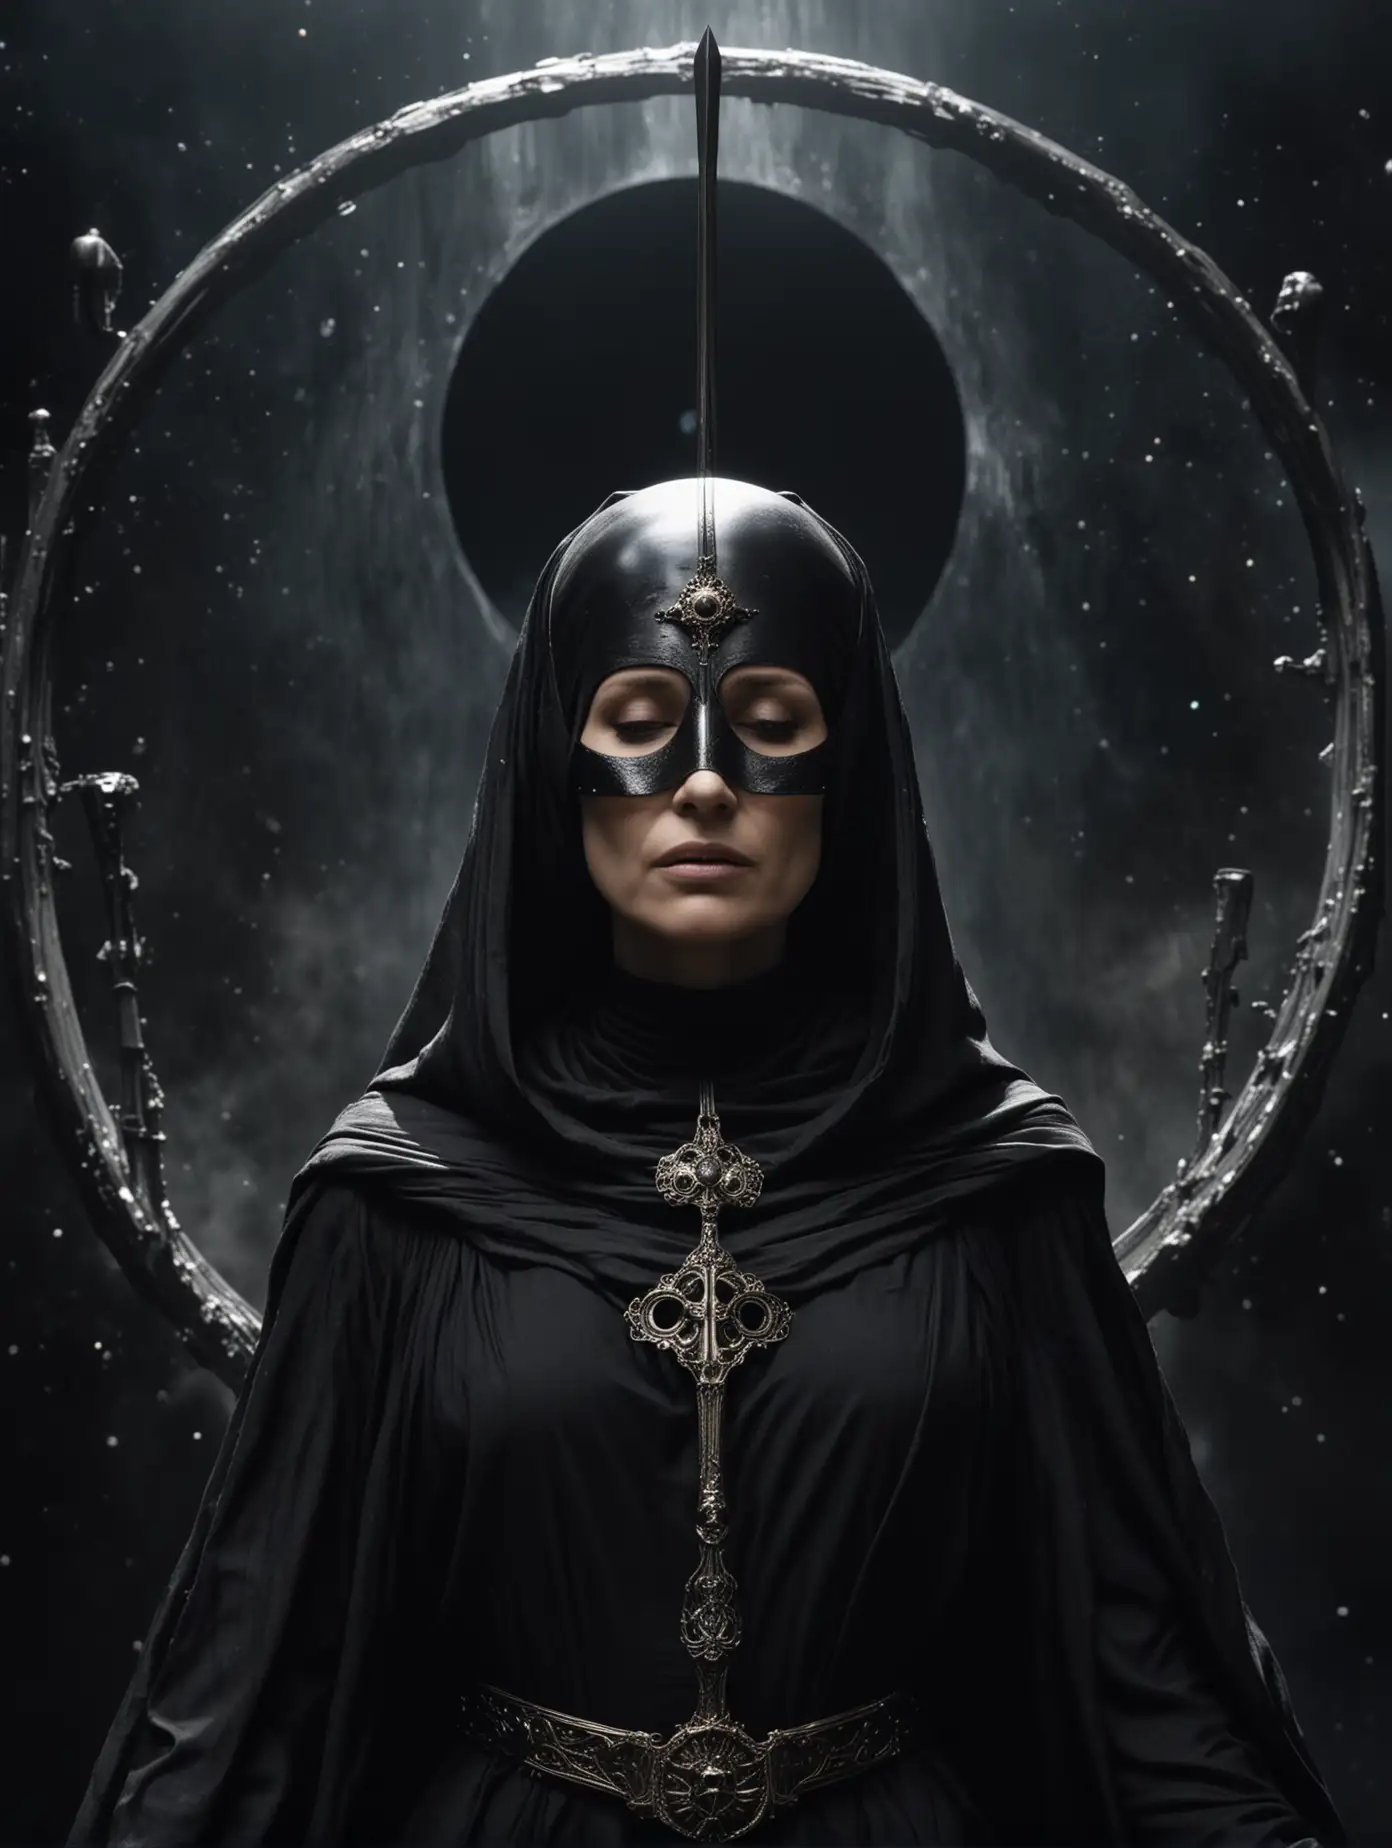 Mystical-Sister-of-the-Bene-Gesserit-Meditates-by-a-Black-Hole-with-CrownDisc-and-Black-Sword